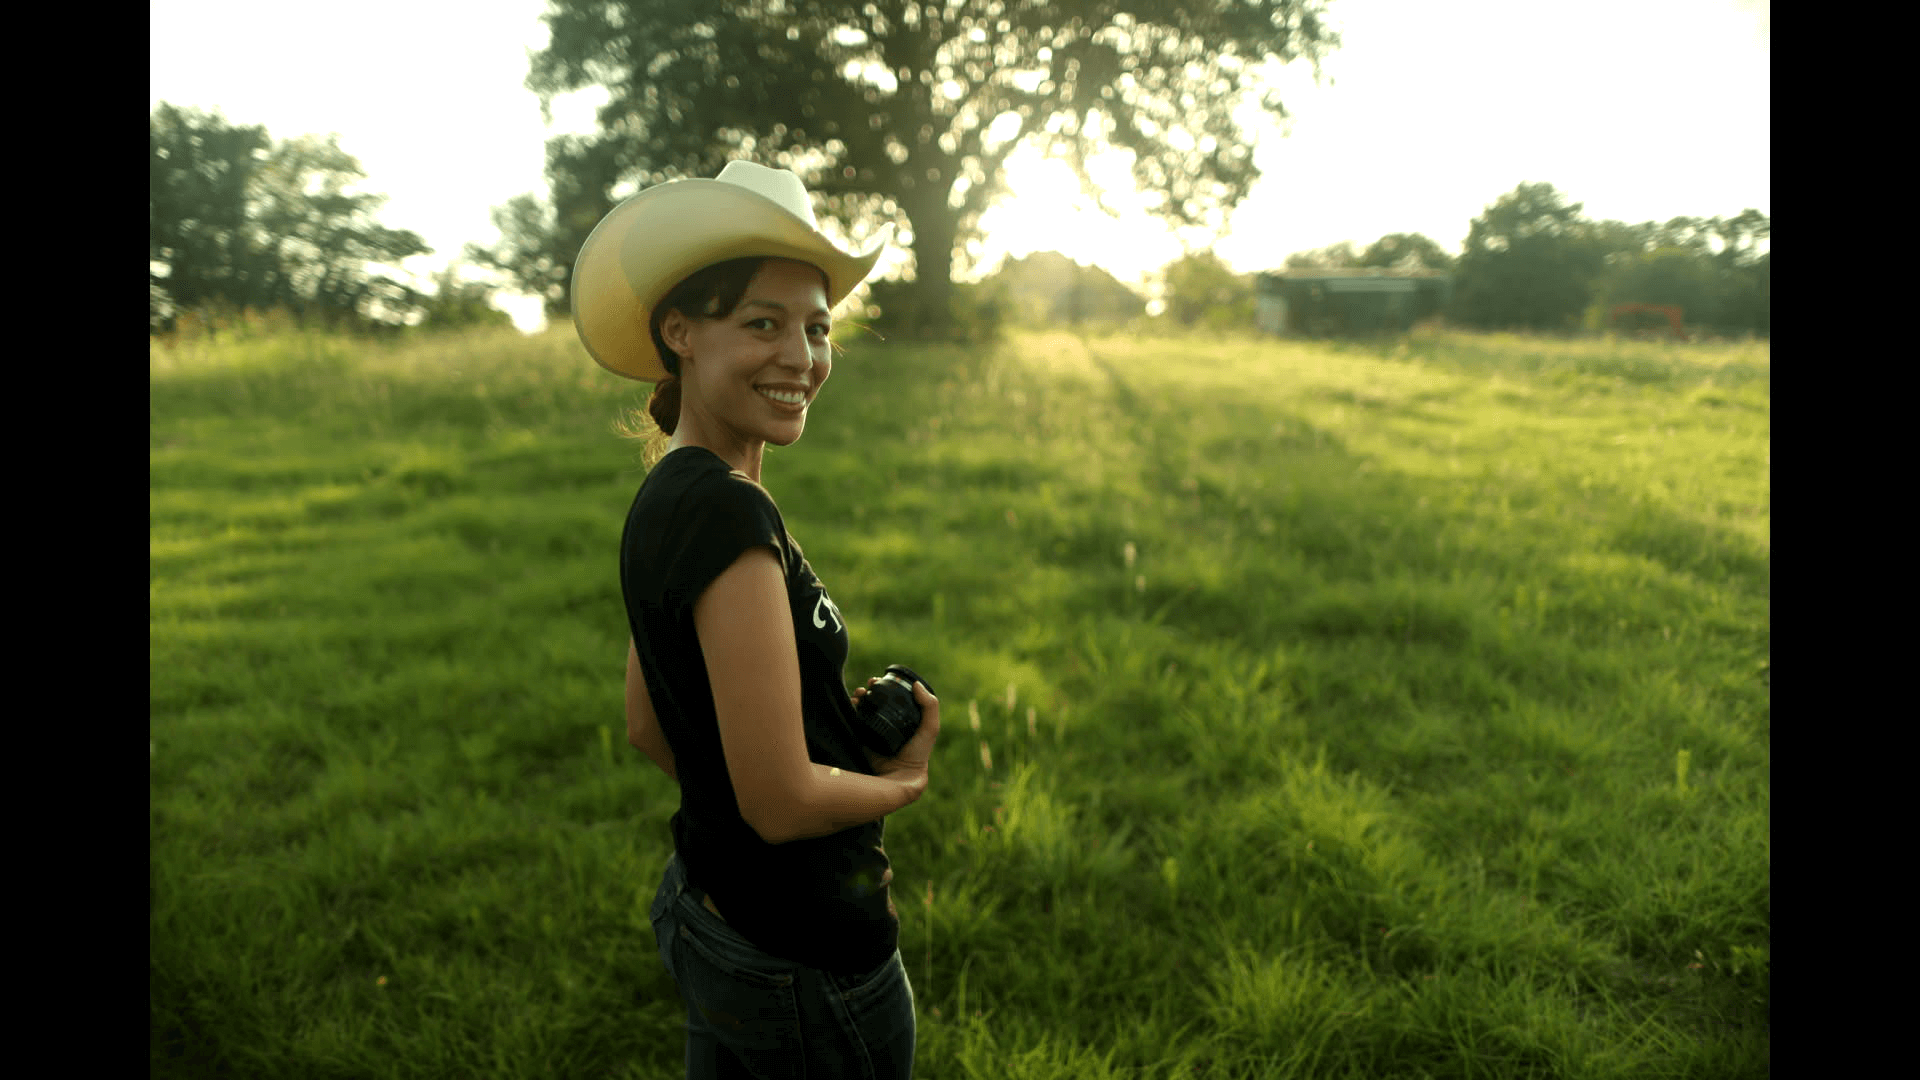 Sonia Kennebeck looking directly at the camera. She is standing in a green field with a tree in the background and is holding a photo lens.